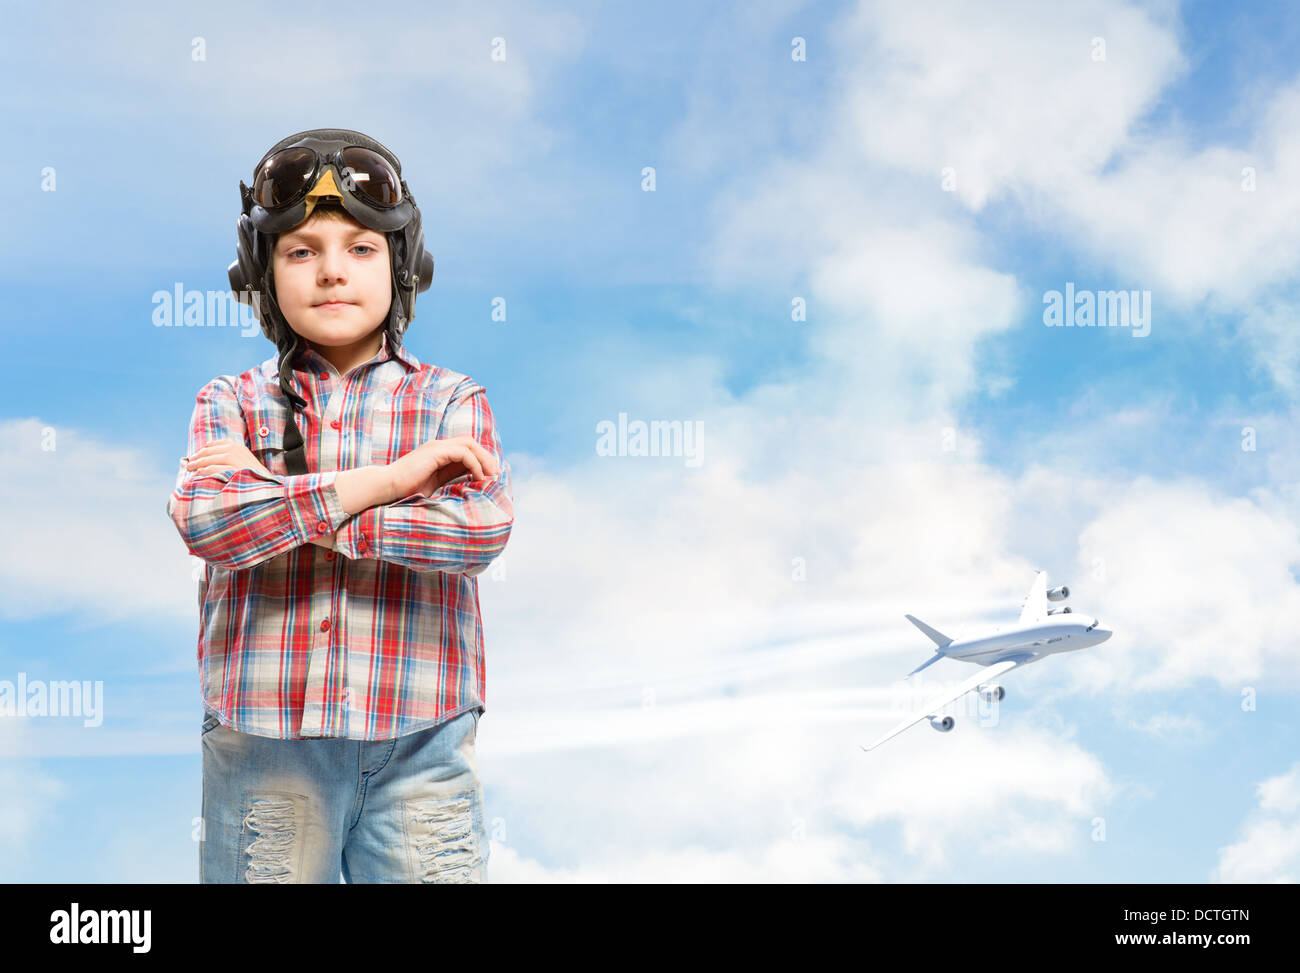 Boy in helmet pilot dreaming of becoming a pilot Stock Photo